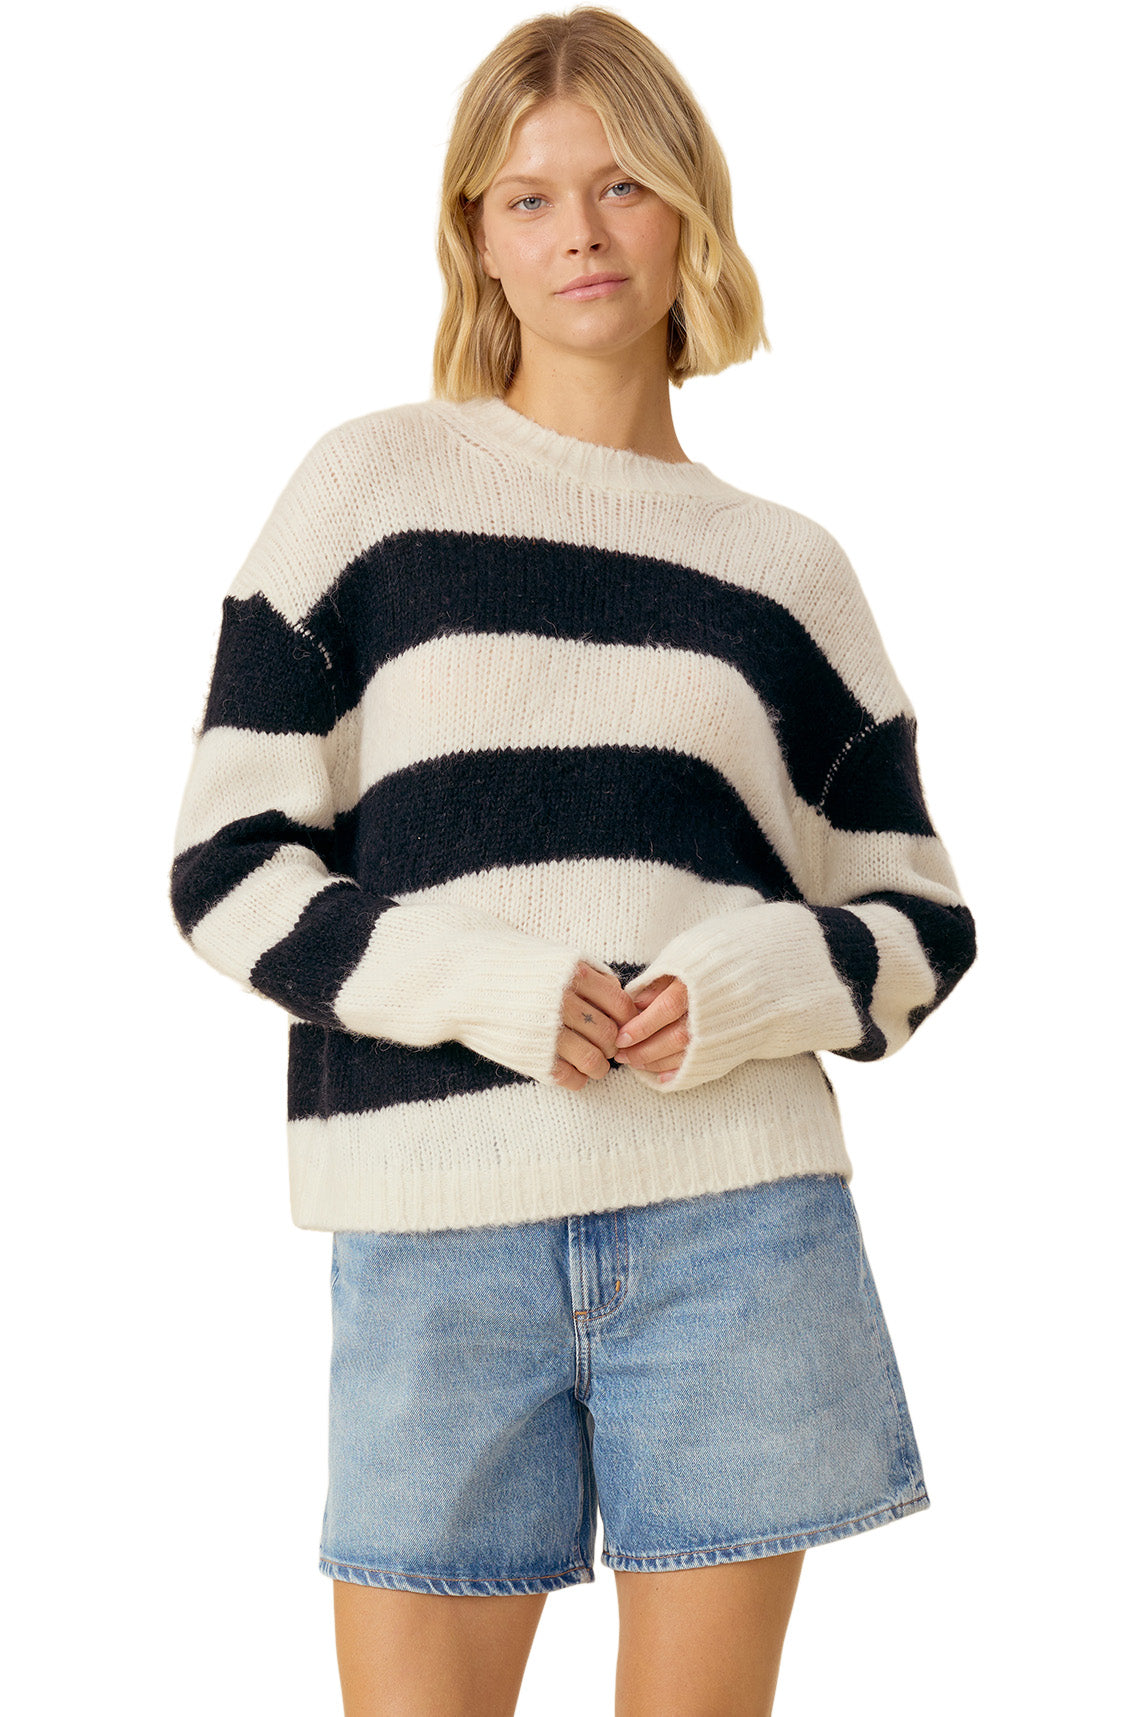 One Grey Day Bardot Striped Sweater in Ivory Combo